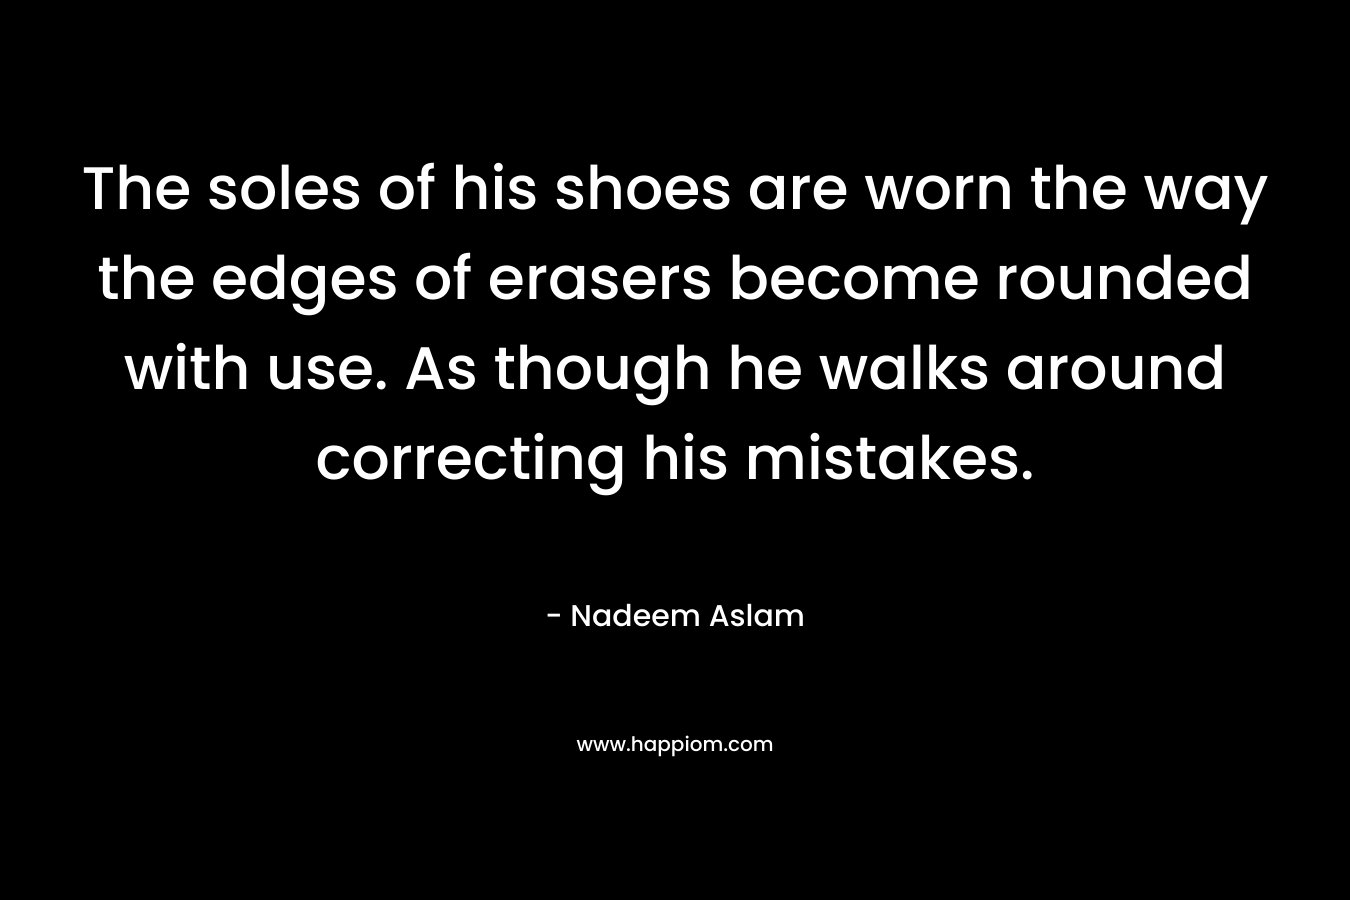 The soles of his shoes are worn the way the edges of erasers become rounded with use. As though he walks around correcting his mistakes. – Nadeem Aslam